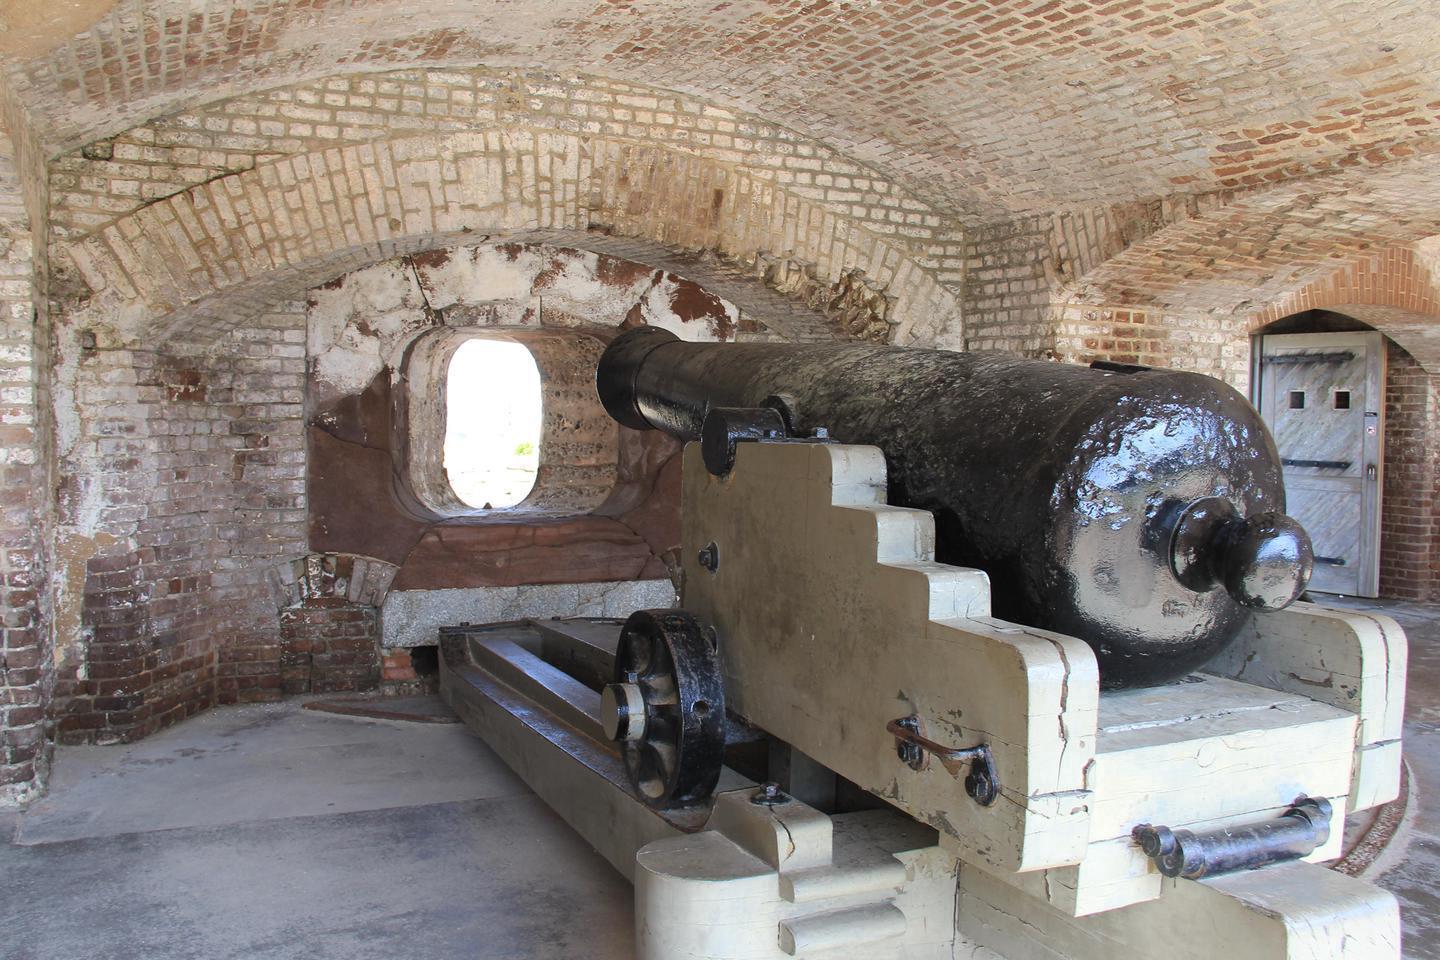 Fort Sumter CannonFort Sumter cannon sitting on cannon carriage under a brick casemate